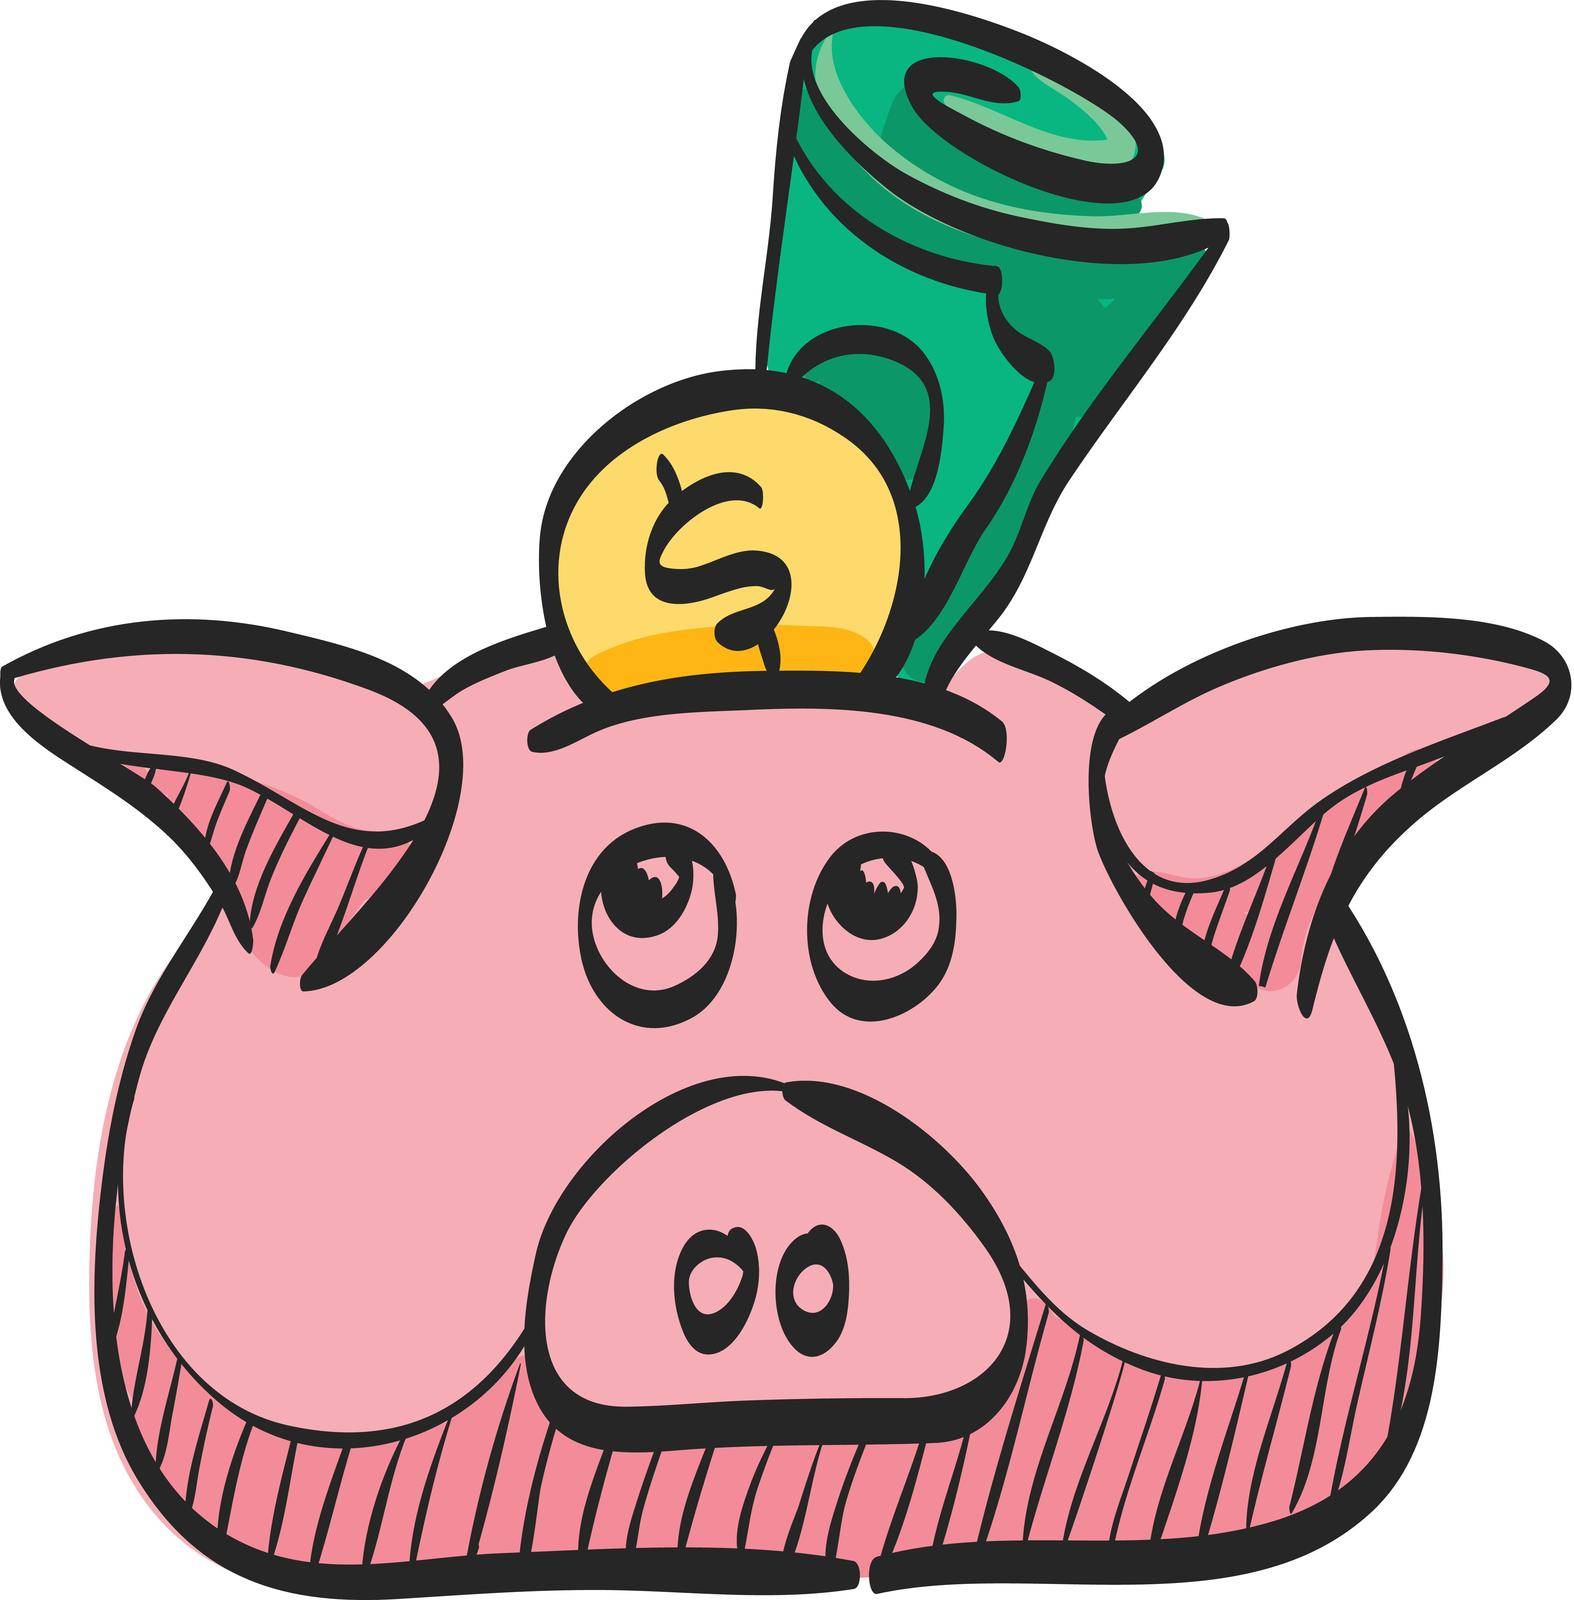 Coin piggy bank icon in color drawing. Saving, kids, bank  by puruan